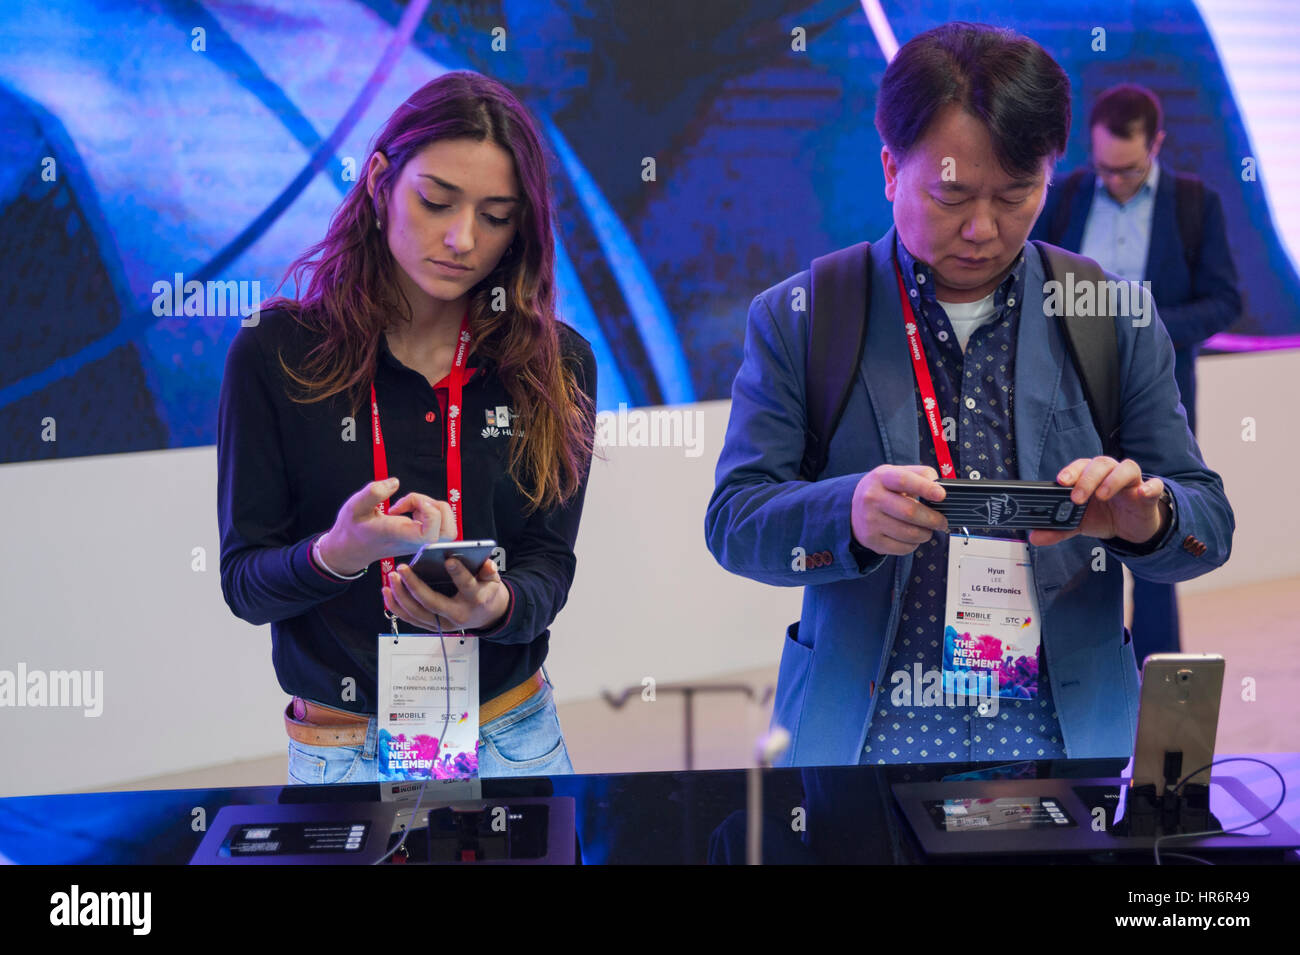 Barcelona, Spain. 27th Feb, 2017. Visitors testing a Huawei P10 during the Mobile World Congress wireless show in Barcelona. The annual Mobile World Congress hosts some of the world's largest communications companies, with many unveiling their latest phones and wearables gadgets. Credit: Charlie Perez/Alamy Live News Stock Photo